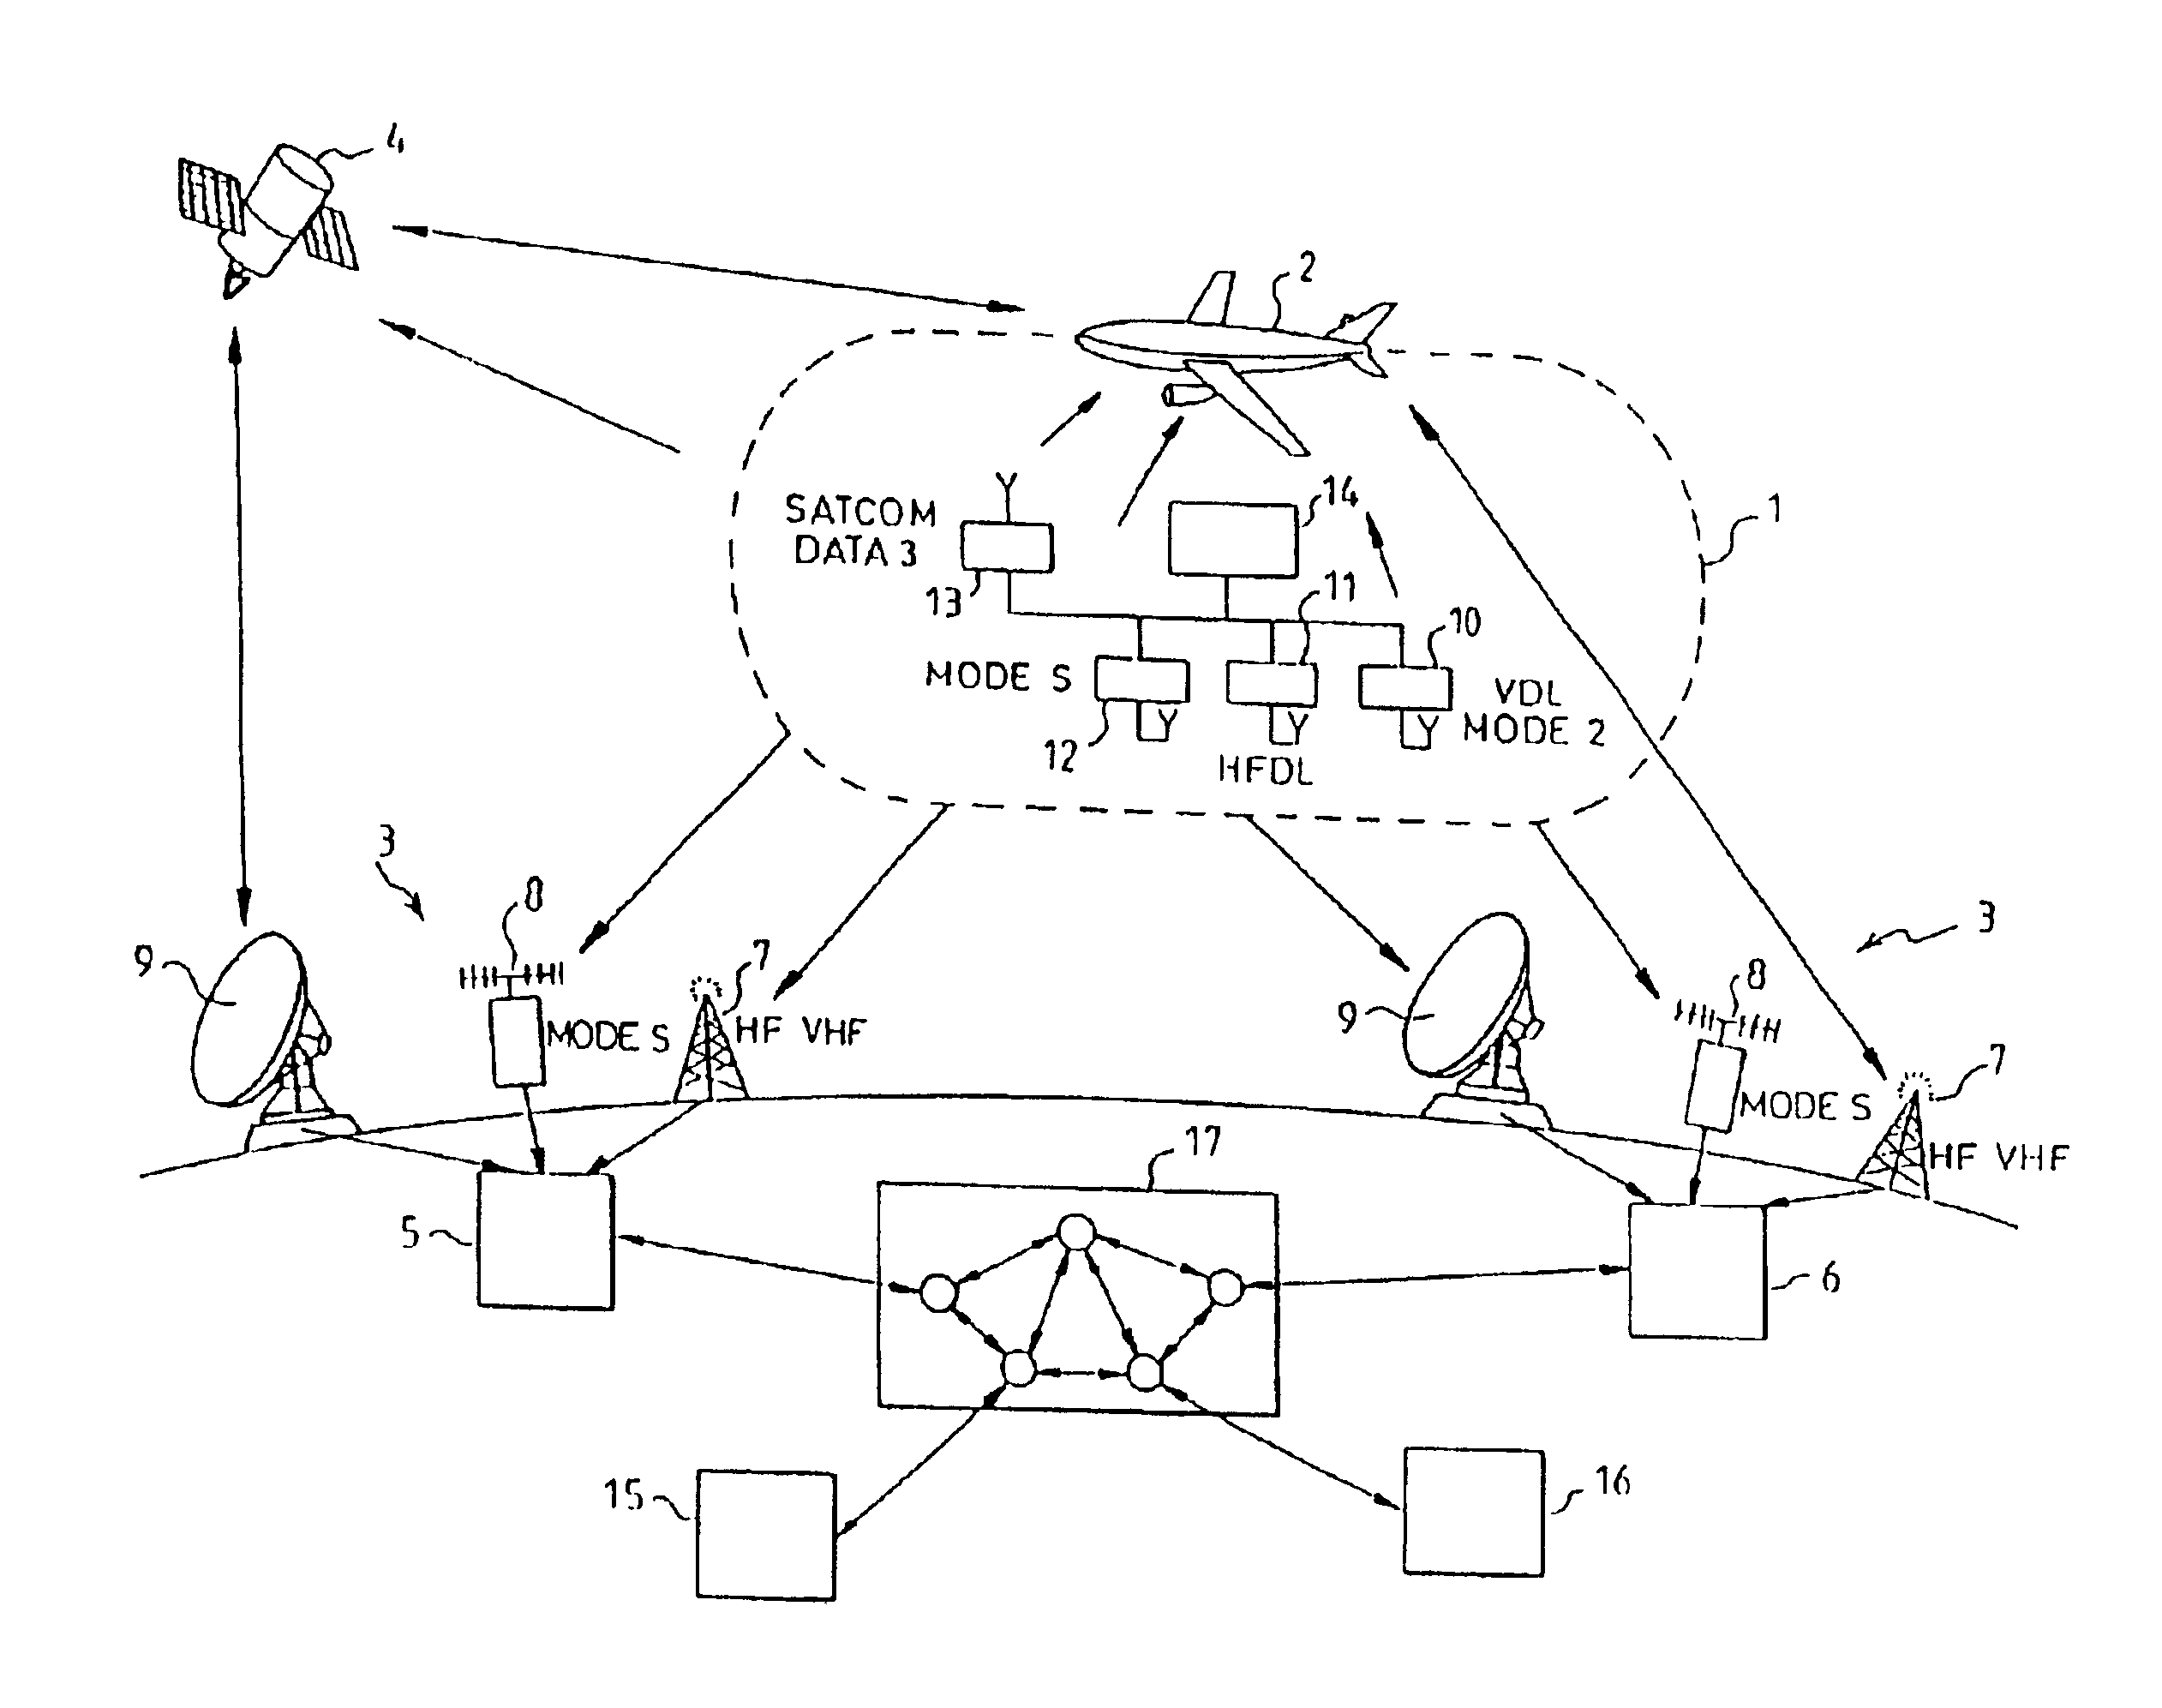 Method for selecting a ground station within an aeronautical telecommunications network